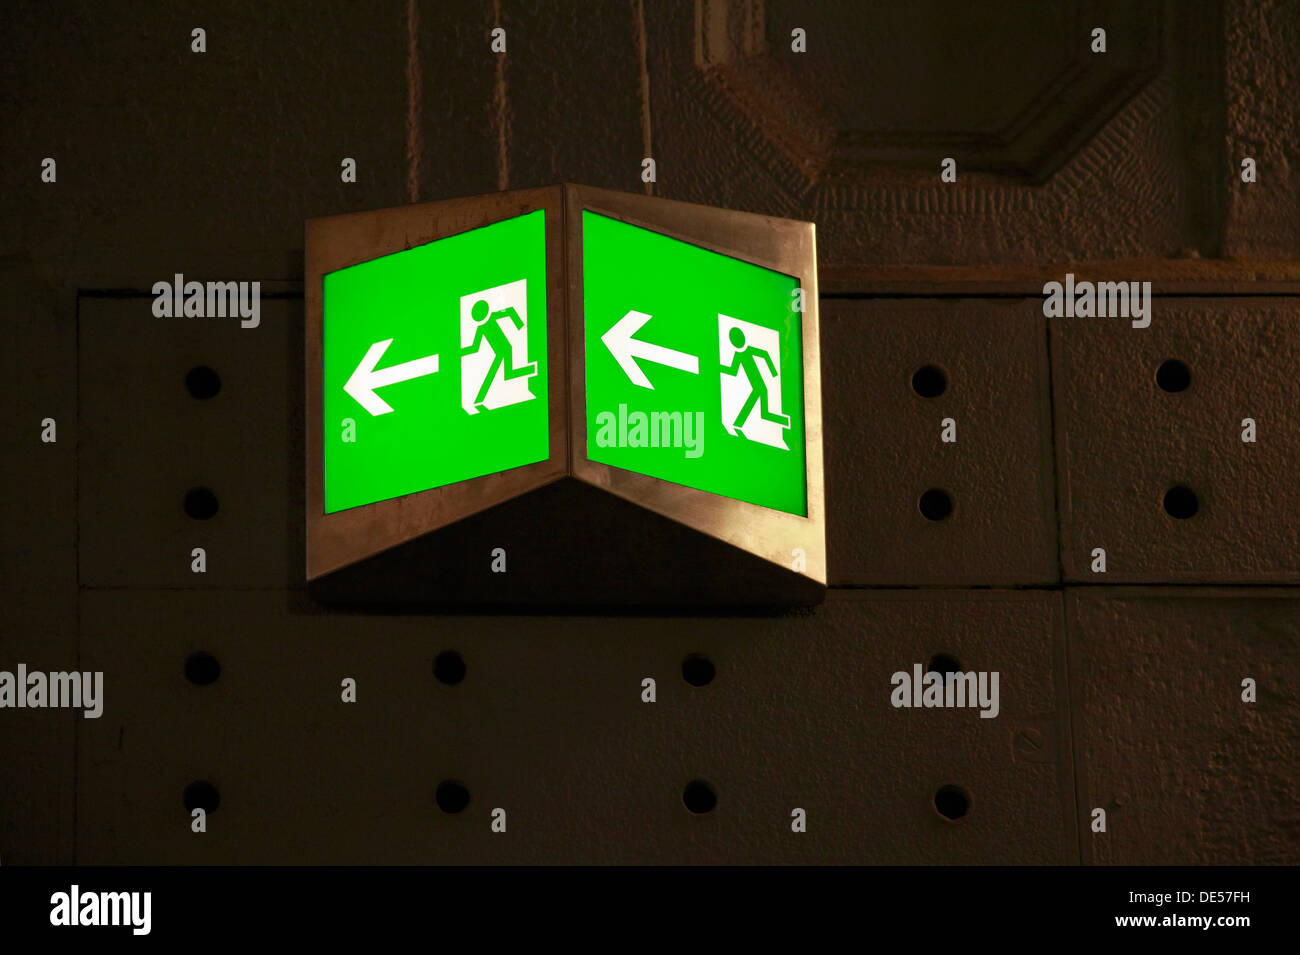 Emergency exit sign, illuminated pictograms, green, fire prevention, evacuation route Stock Photo